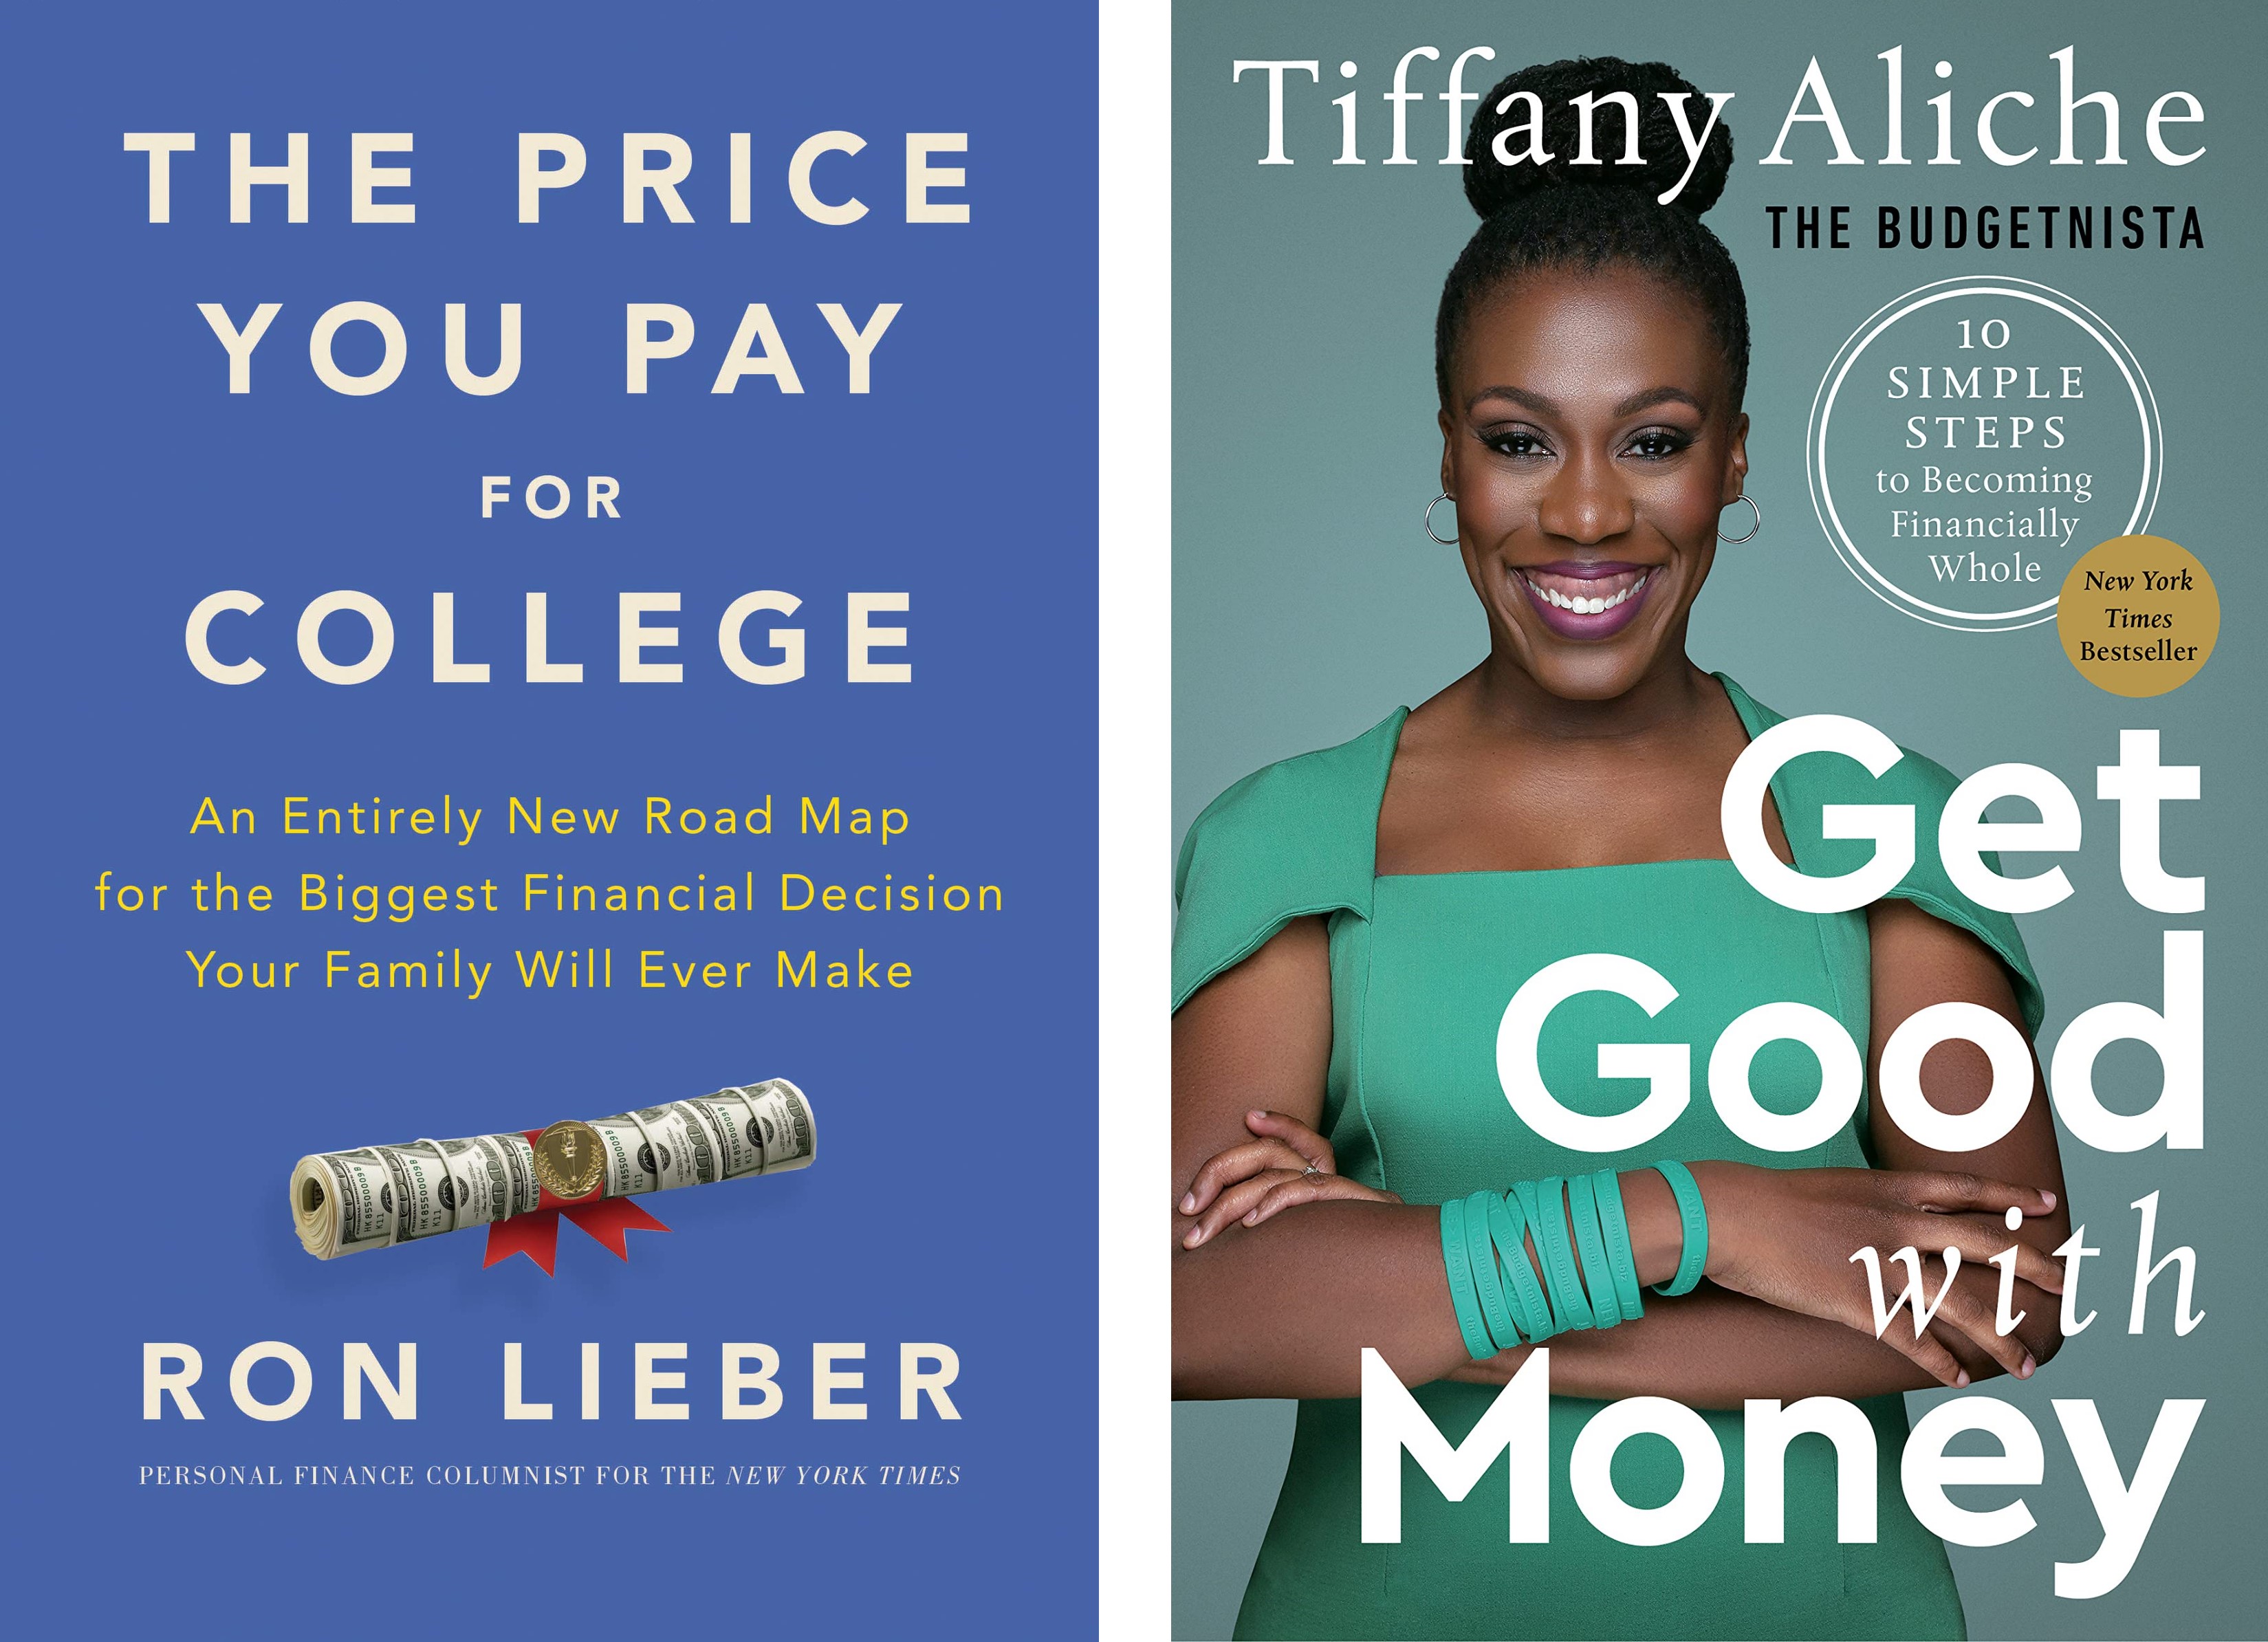 Personal Finance Best-Sellers, Sept. 2021 | The Most In-Demand in Libraries & Bookstores